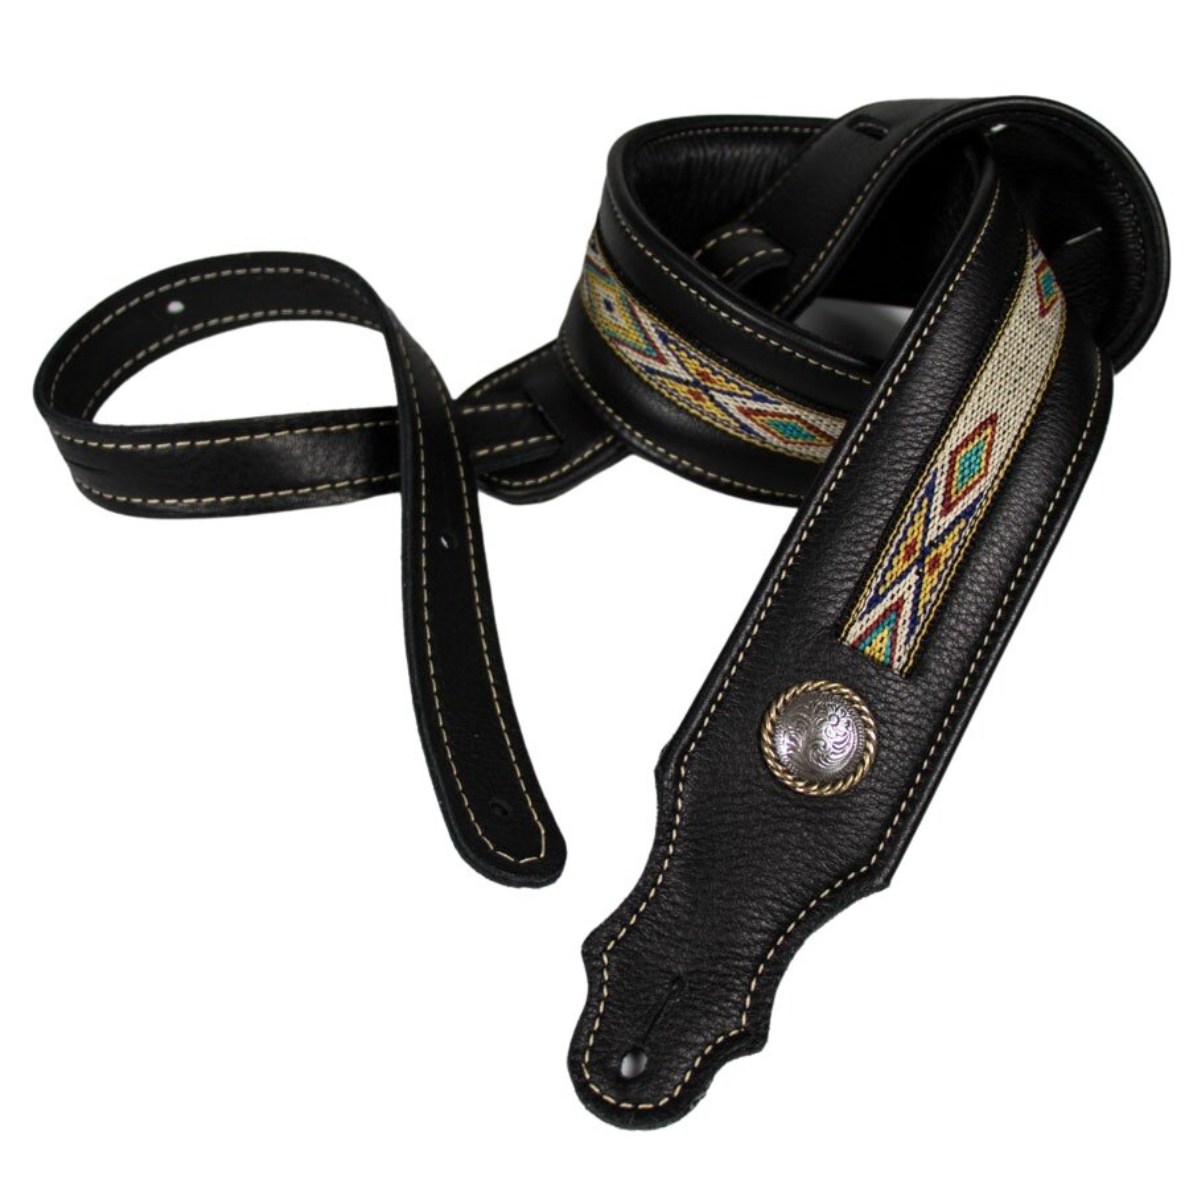 2" Franklin Straps Padded SW Hitch Weave Black Leather Guitar Strap